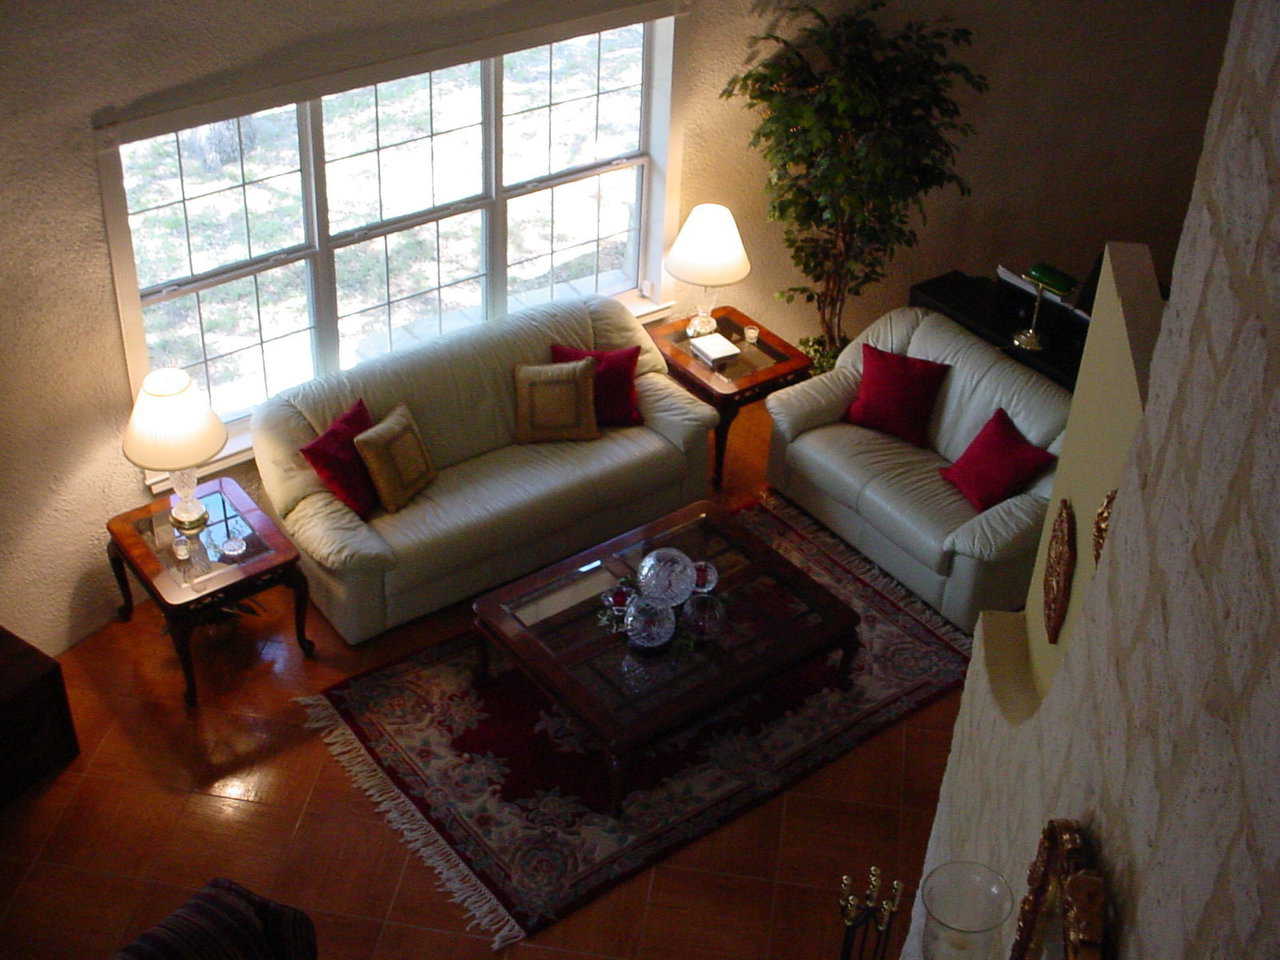 Living area — The great room is divided into a formal living room and dining area.